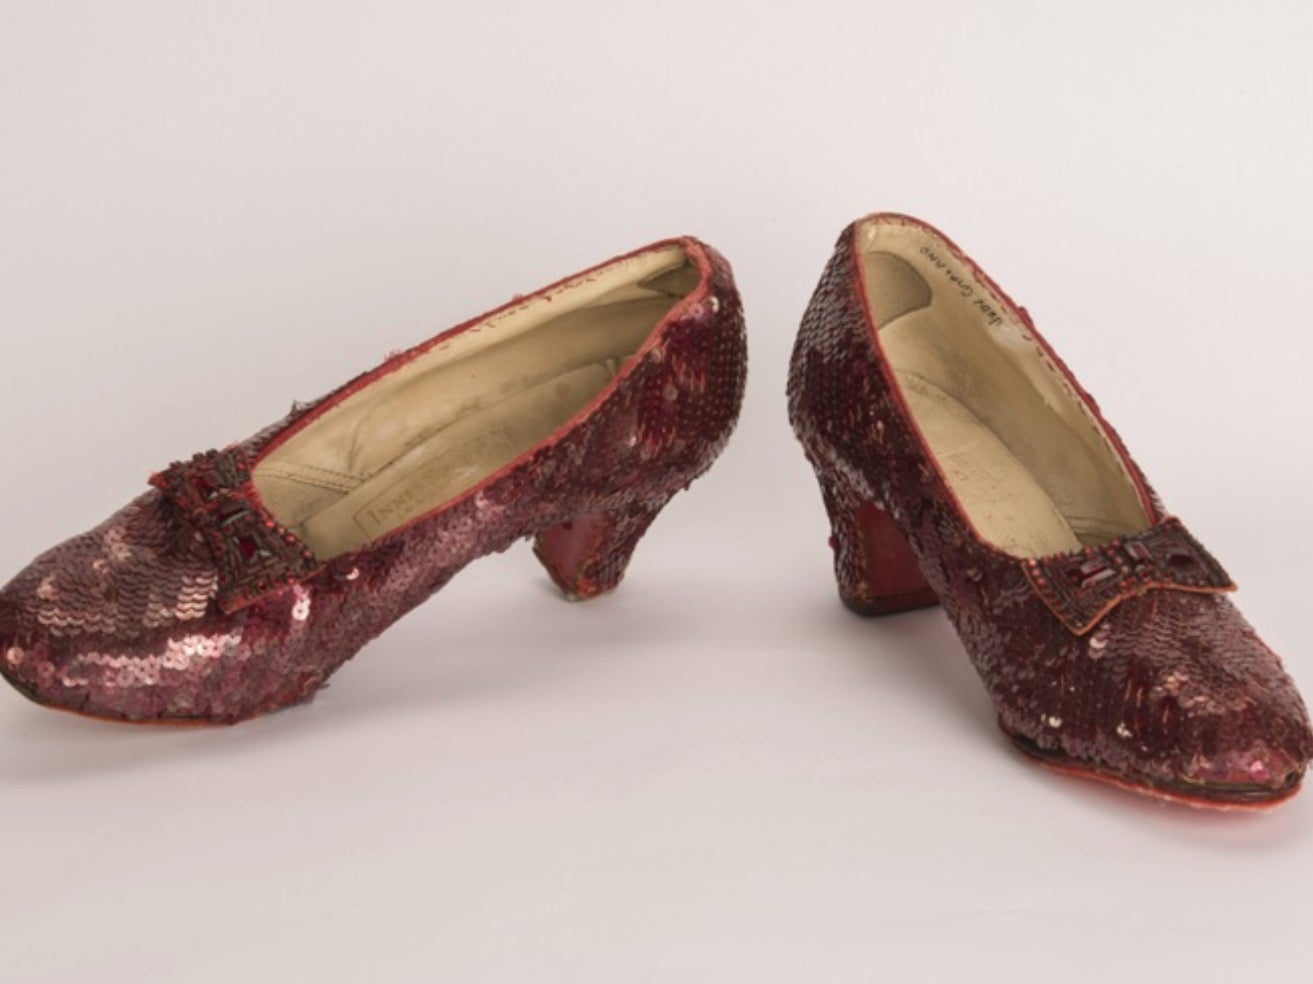 One of four surviving pairs of Dorothy’s ruby red slippers from ‘The Wizard of Oz’; this pair was stolen in 2005 and recovered by the FBI in 2018